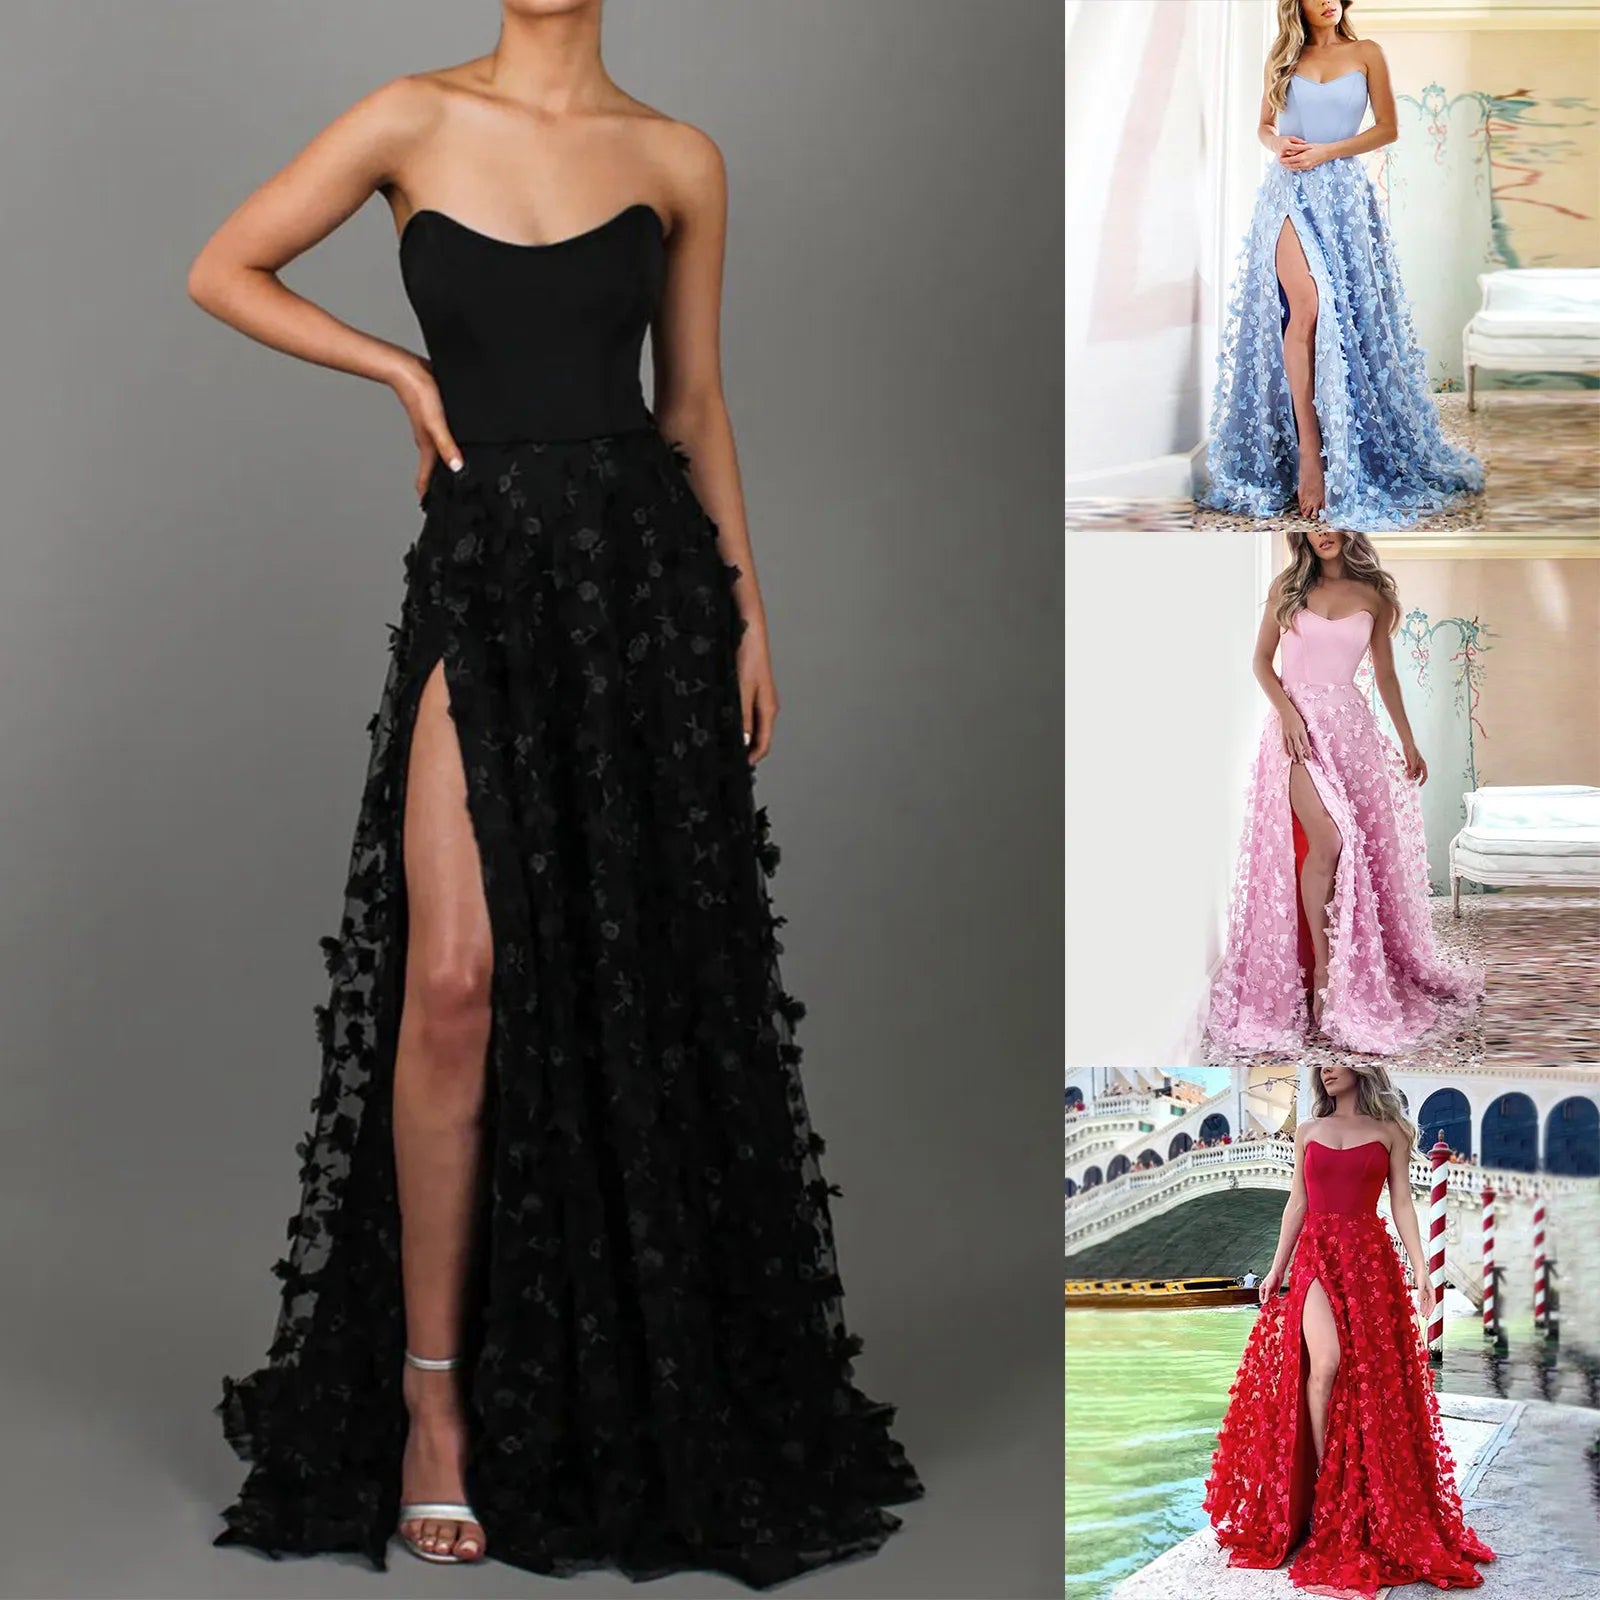 Dresses Exquisite Strapless Sheath Cocktail Homecoming Flowers Tulle Satin Occasion Evening Gown Party Dresses For Women Prom